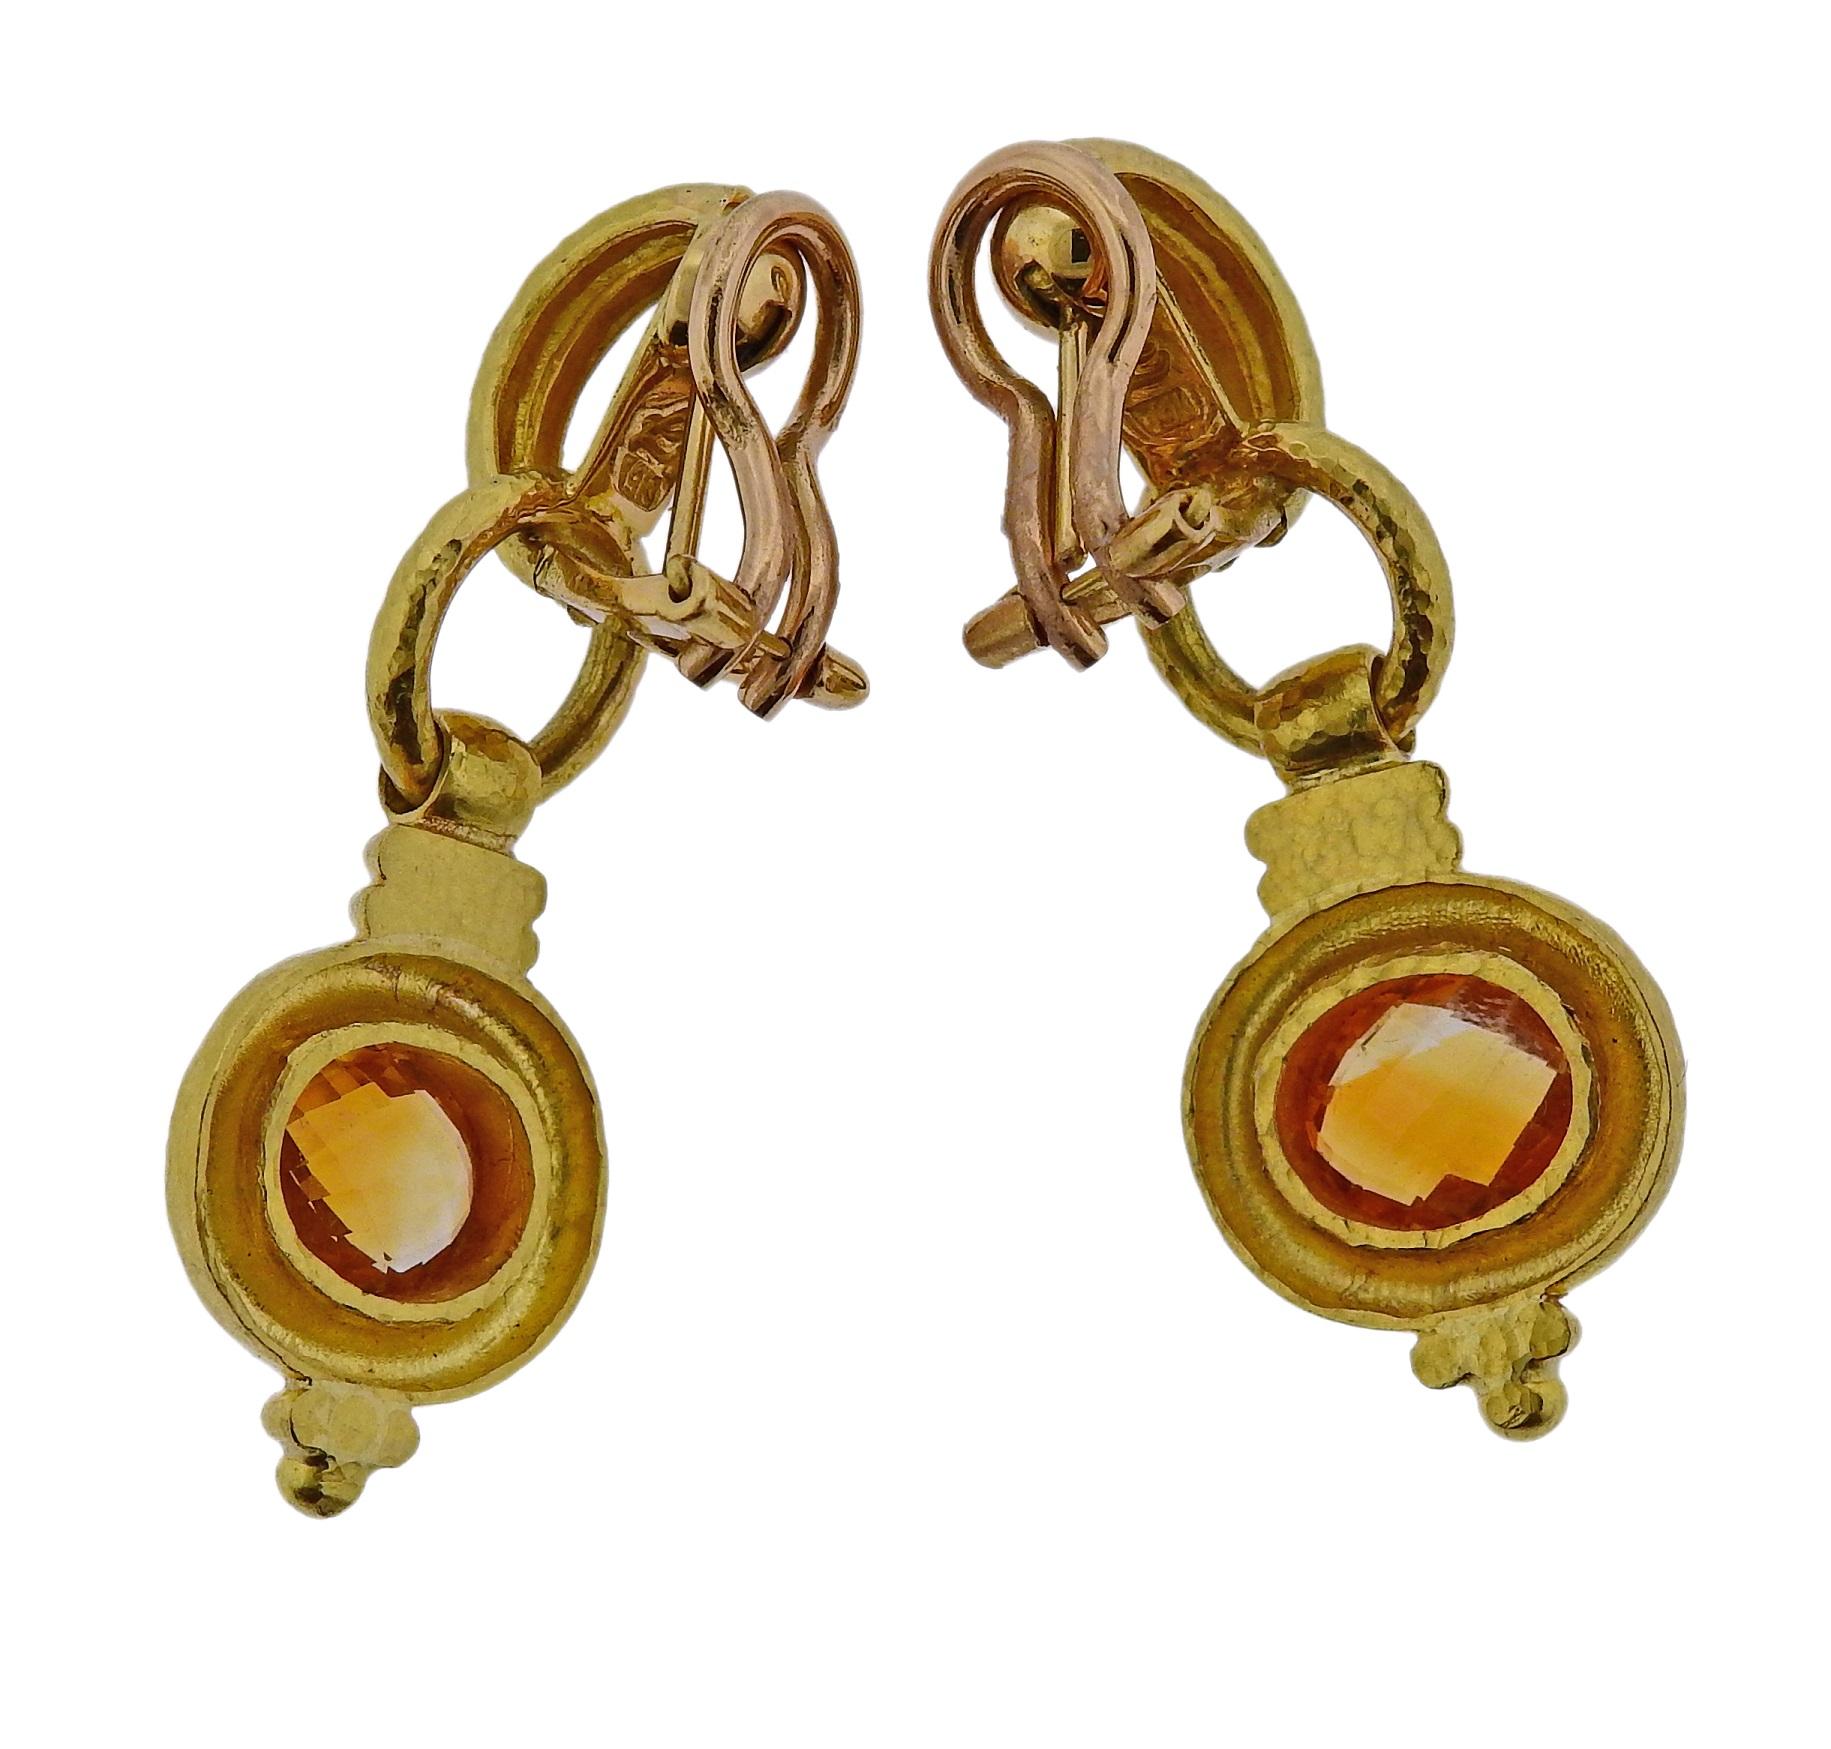 Pair of signature 19k yellow gold drop earrings, designed by Elizabeth Locke, set with faceted citrines. Earrings are 43mm long x 16mm wide (with collapsible posts). Earrings weigh 18.1 grams, marked 19k, E Locke mark.
